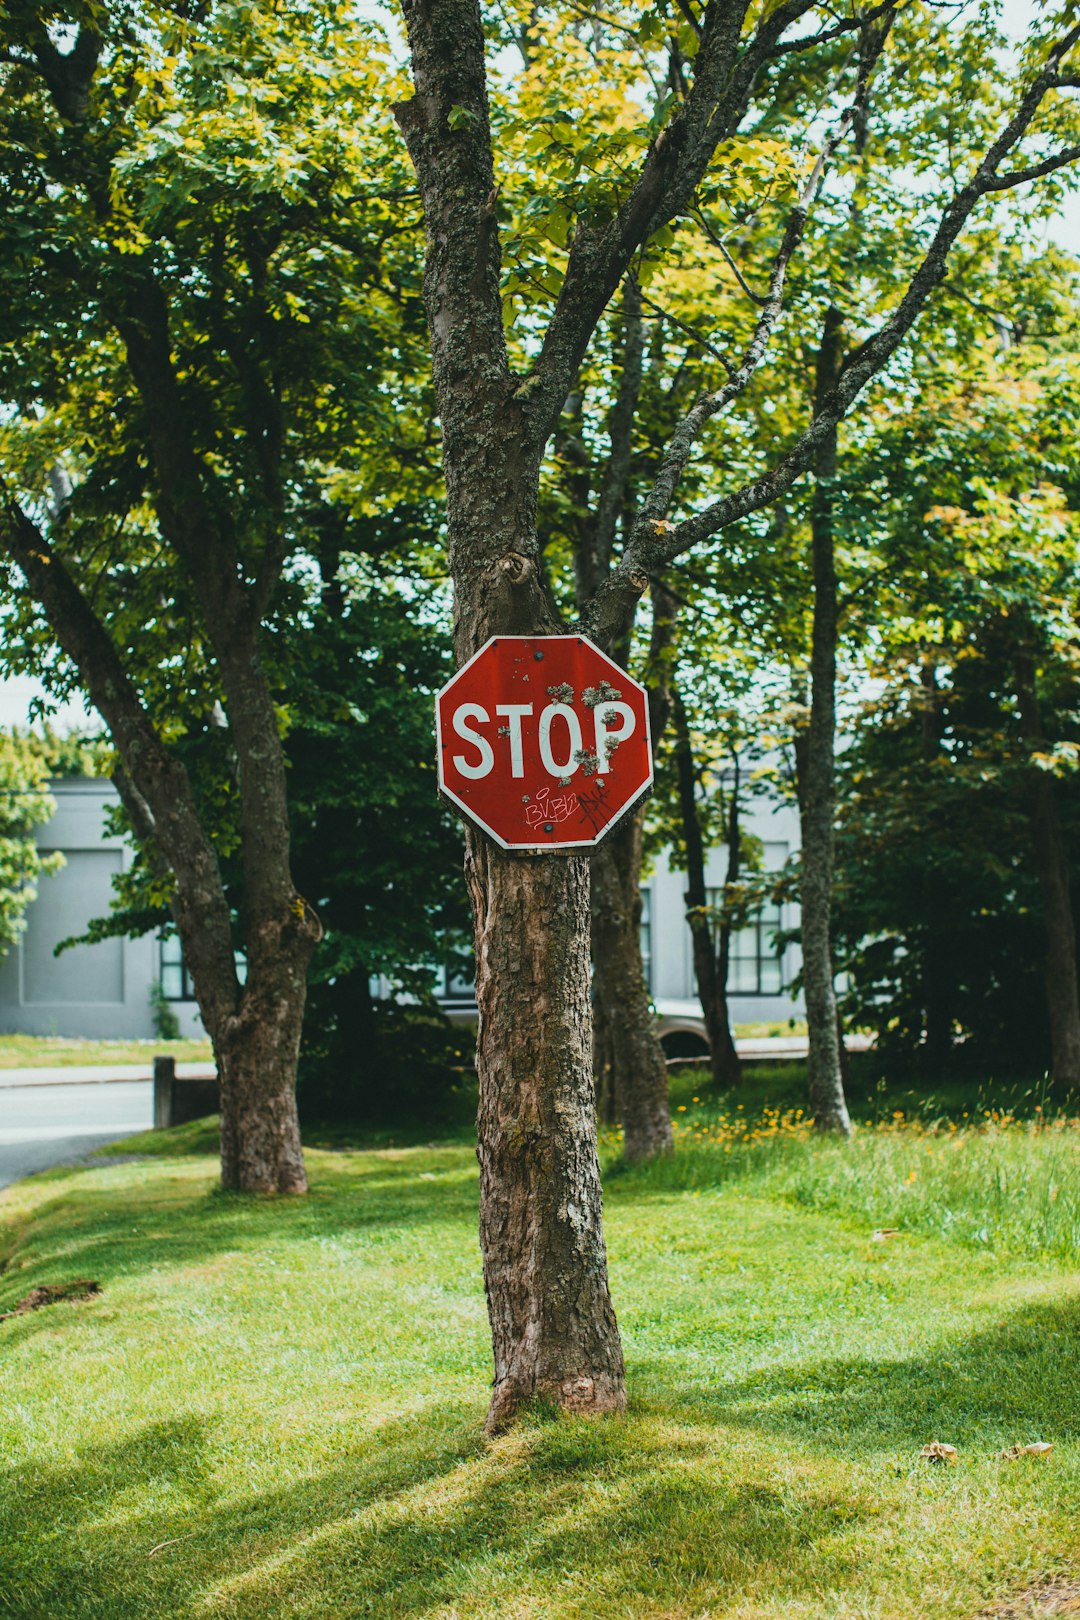 stop sign on green grass field near tree during daytime